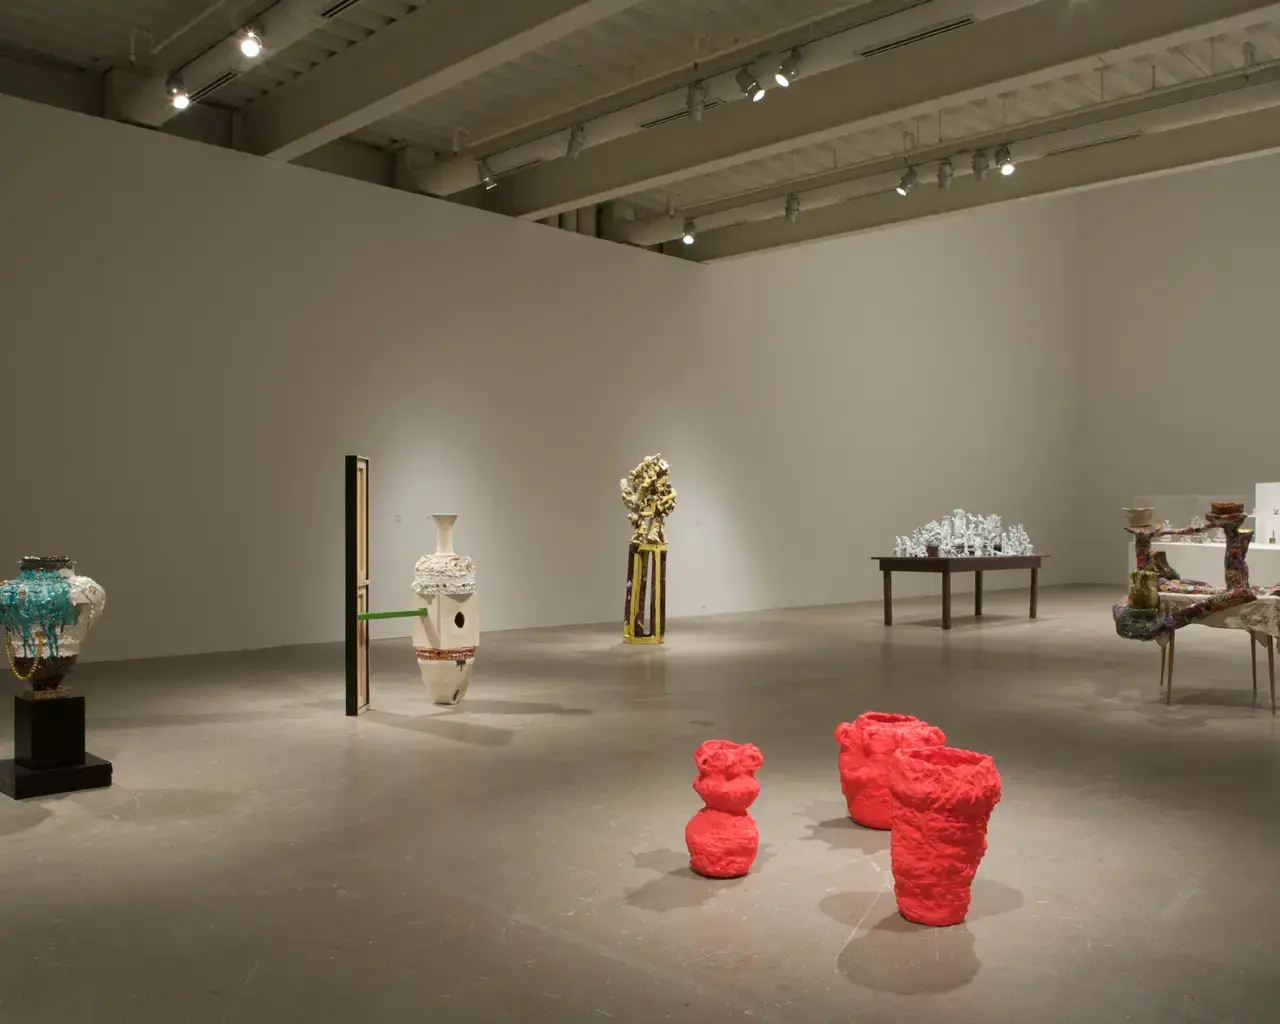 Installation view of Dirt on Delight&nbsp;at the Institute of Contemporary Art. Photo by Aaron Igler/Greenhouse Media.